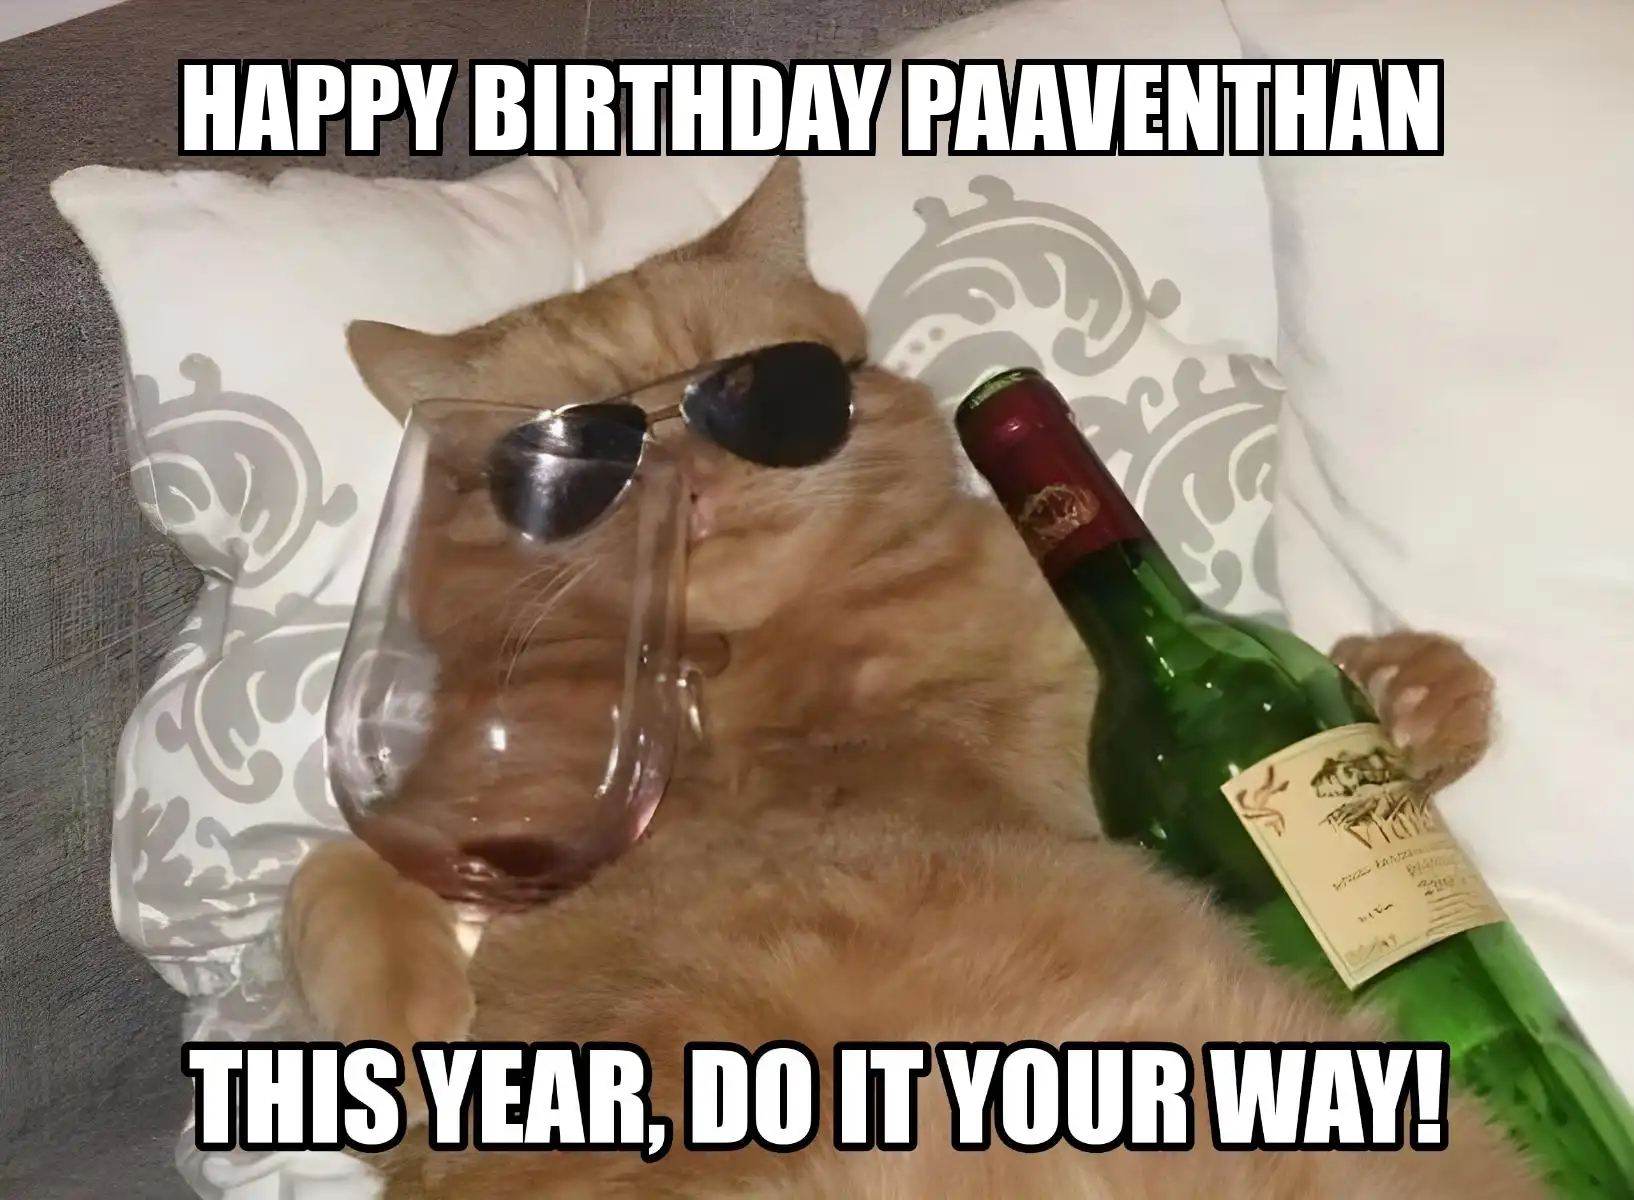 Happy Birthday Paaventhan This Year Do It Your Way Meme